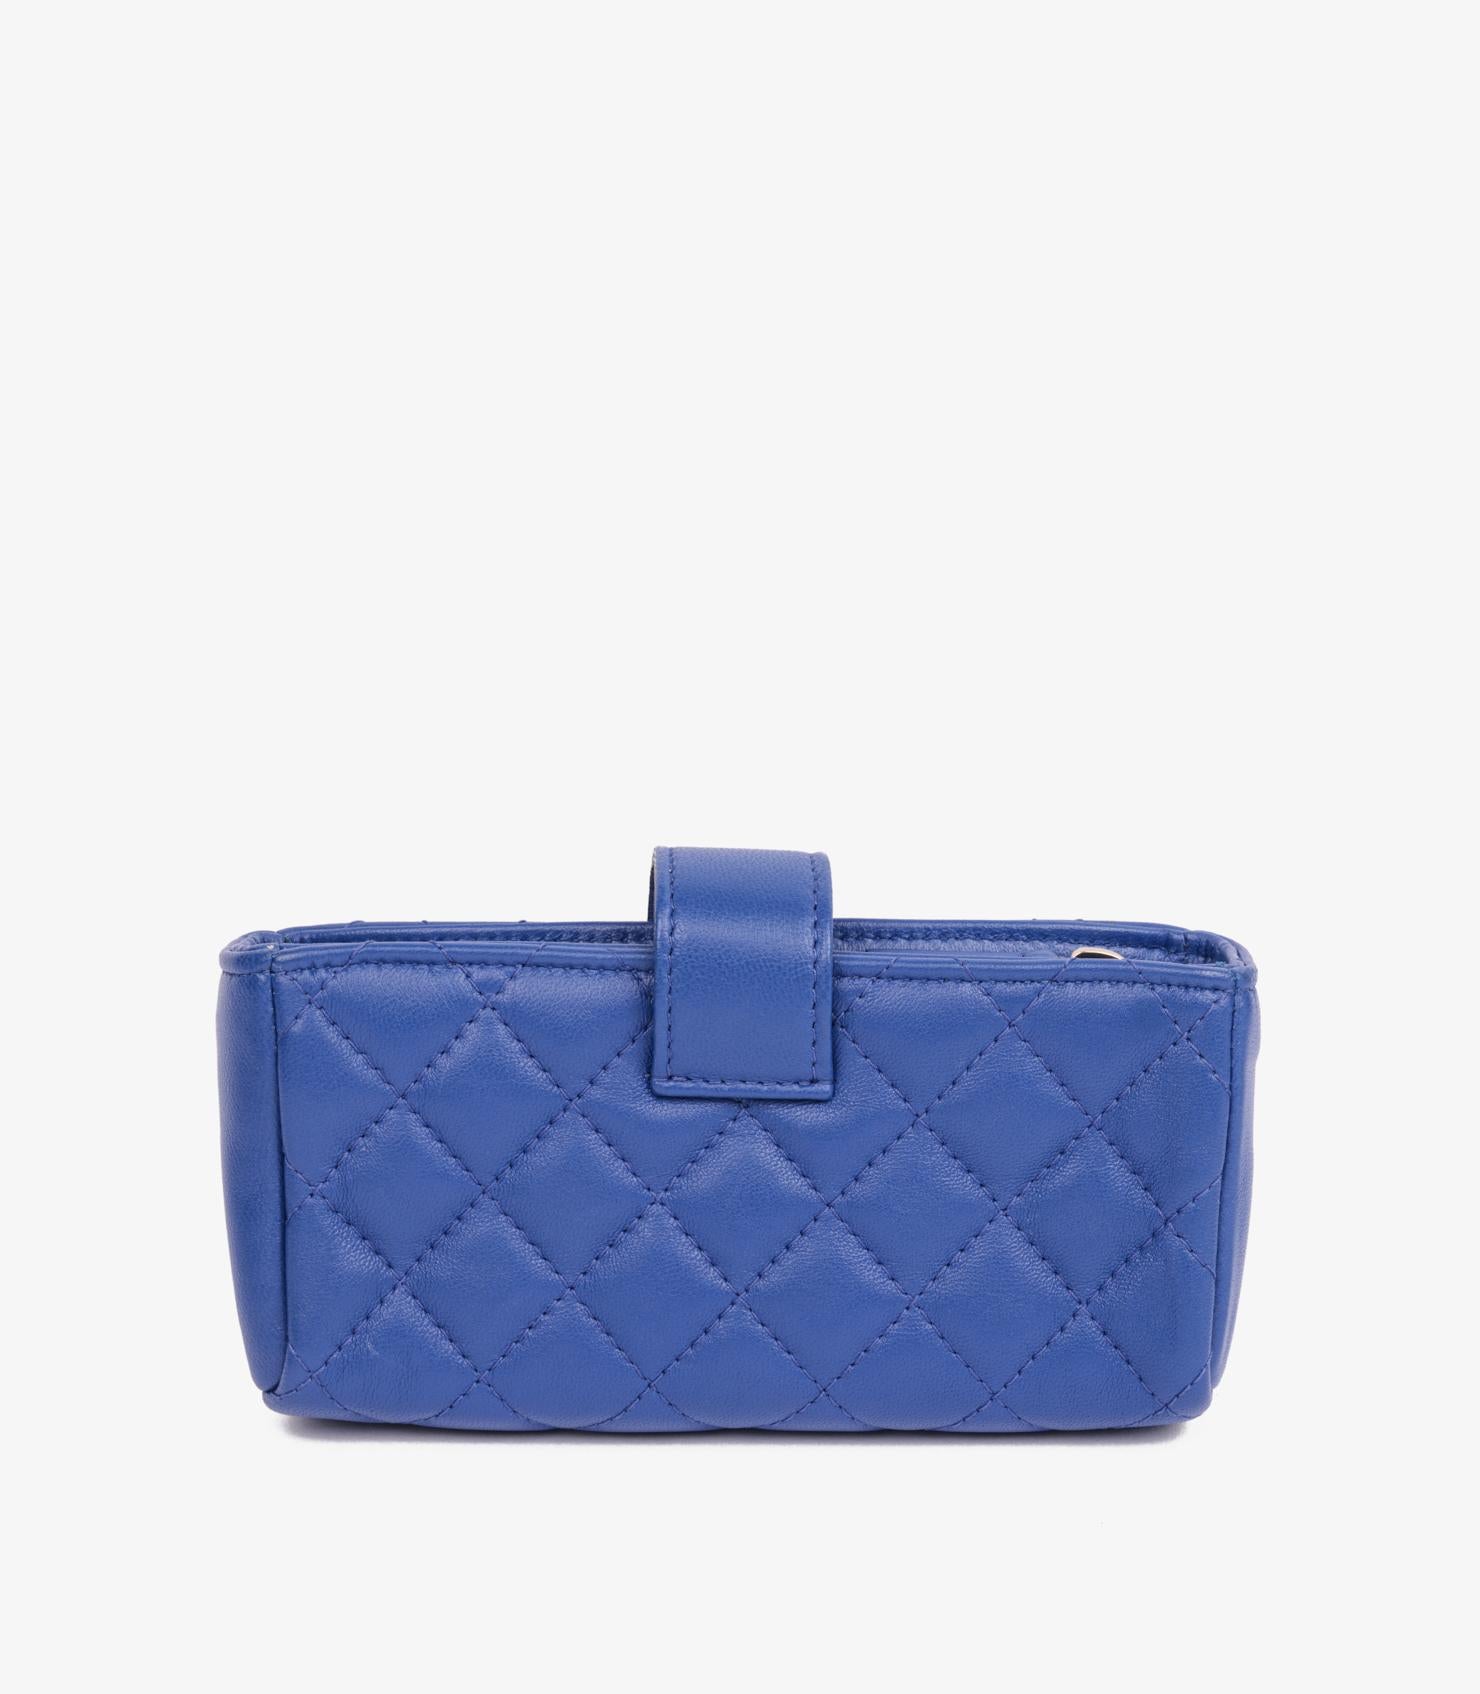 Chanel Cobalt Blue Quilted Lambskin Mini Pouch

Brand- Chanel
Model- Classic Pouch
Product Type- Pouch
Serial Number- 20231411
Age- Circa 2015
Accompanied By- Chanel Dust Bag, Authenticity Card
Colour- Cobalt Blue
Hardware- Matte Gold
Material(s)-